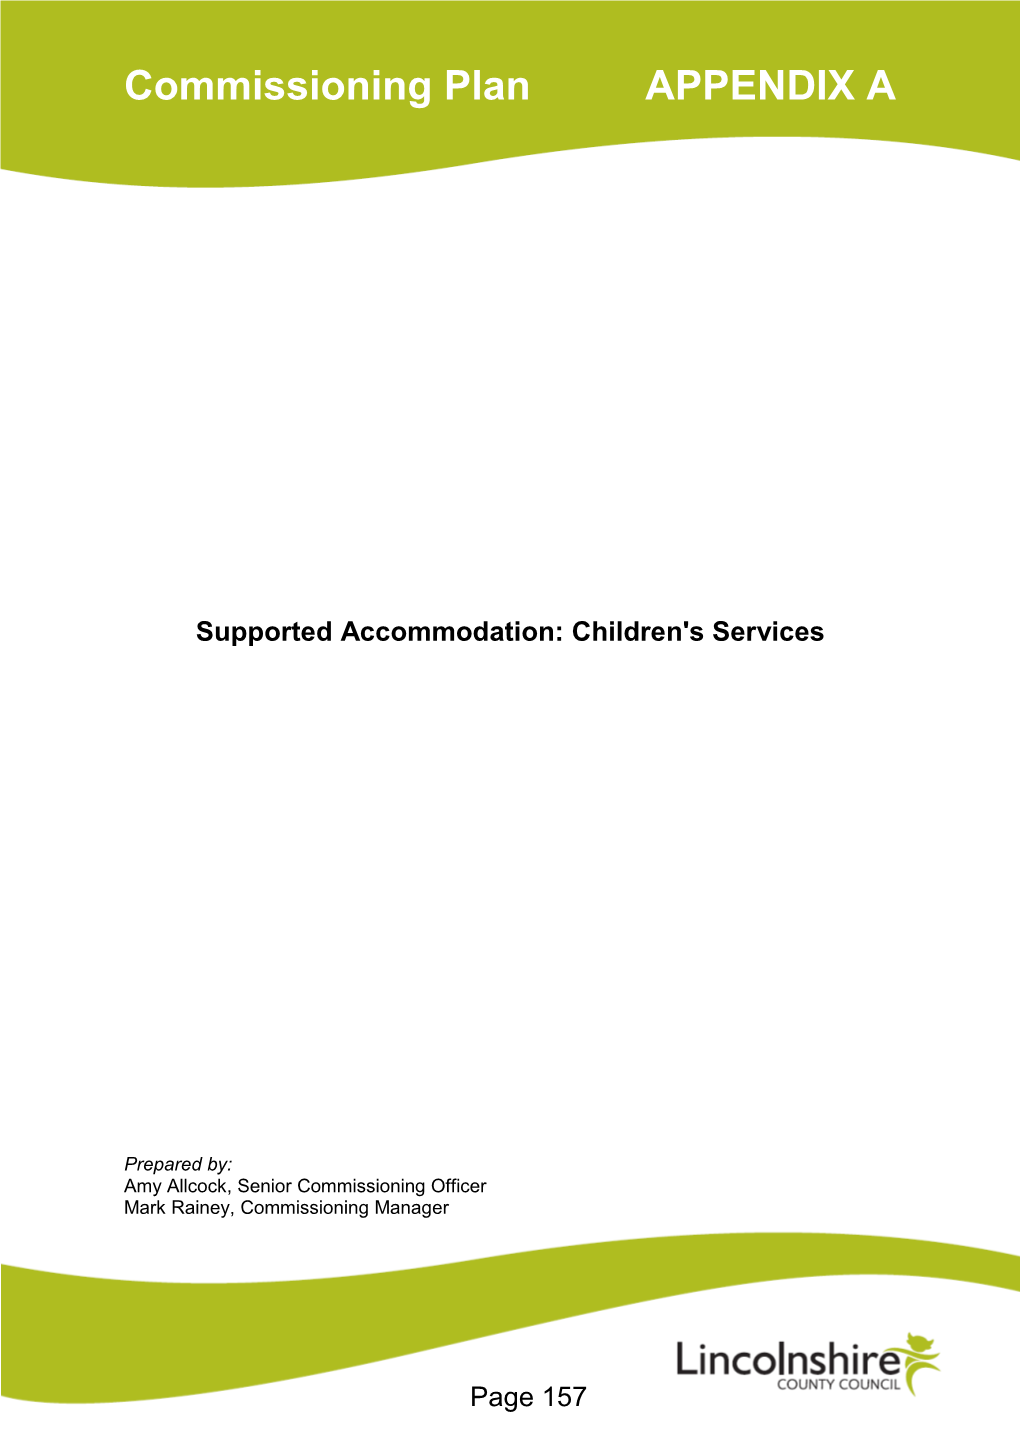 Supported Accommodation: Children's Services